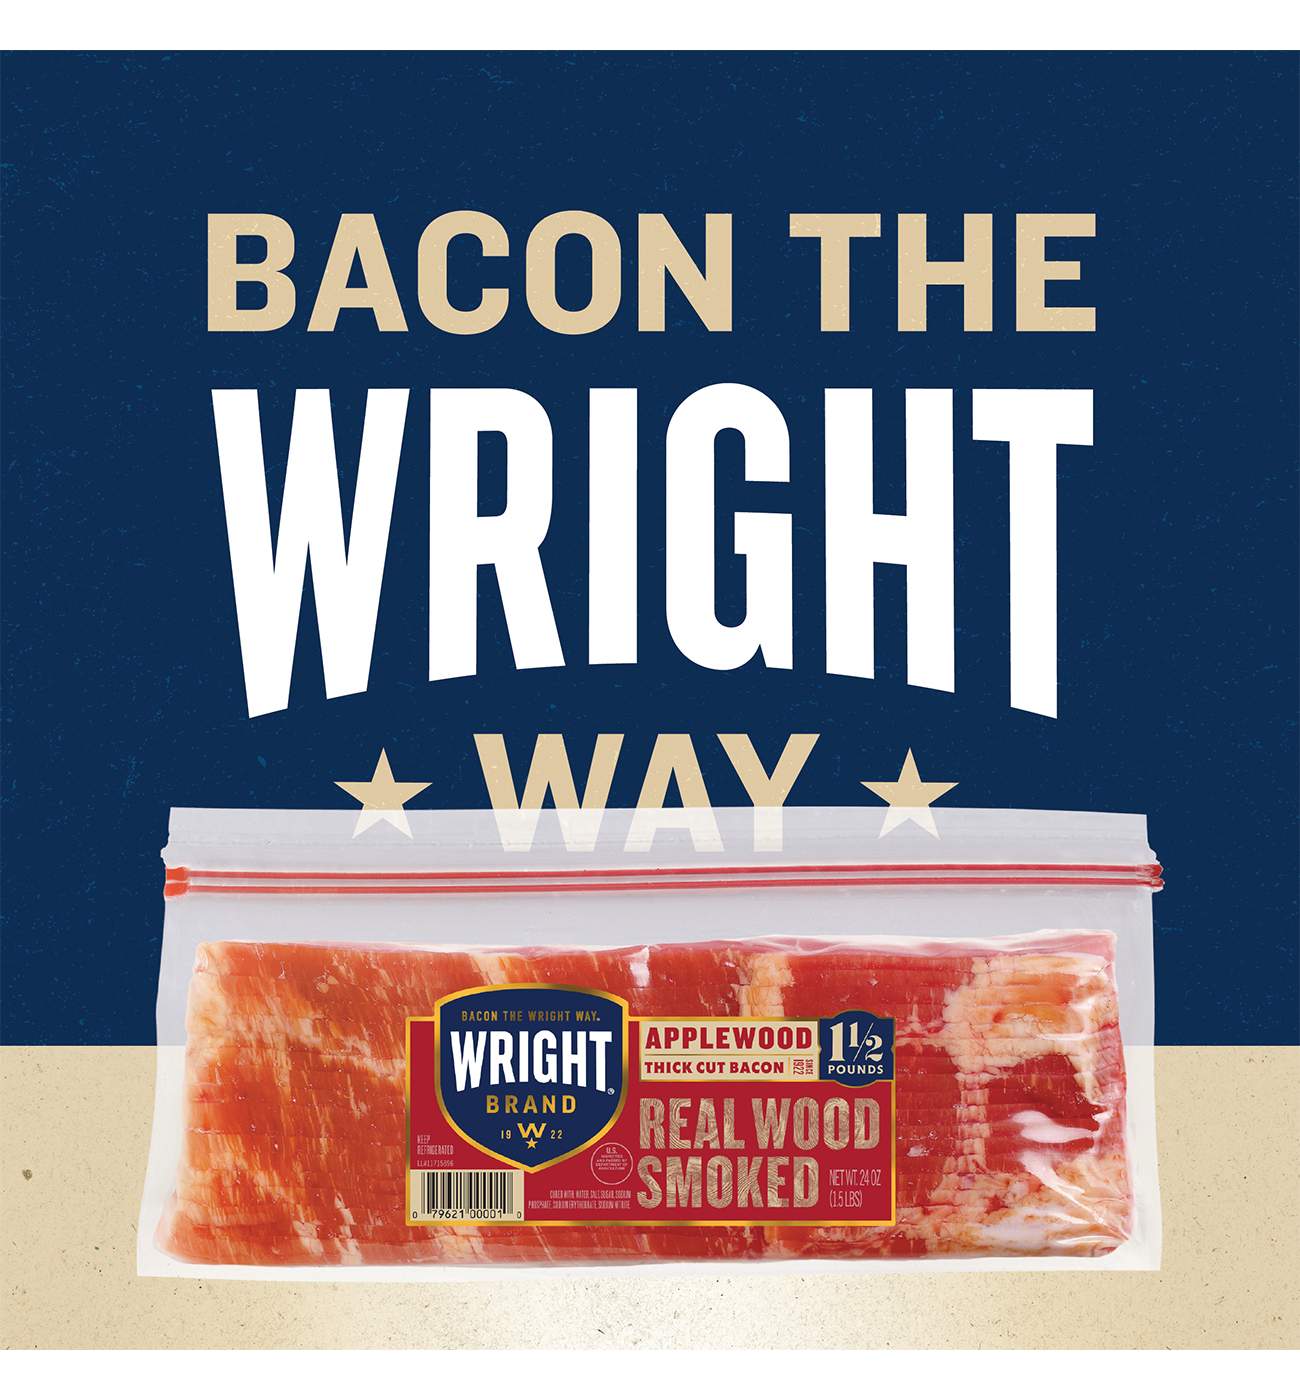 Wright Brand Applewood Smoked Thick Cut Bacon; image 4 of 6